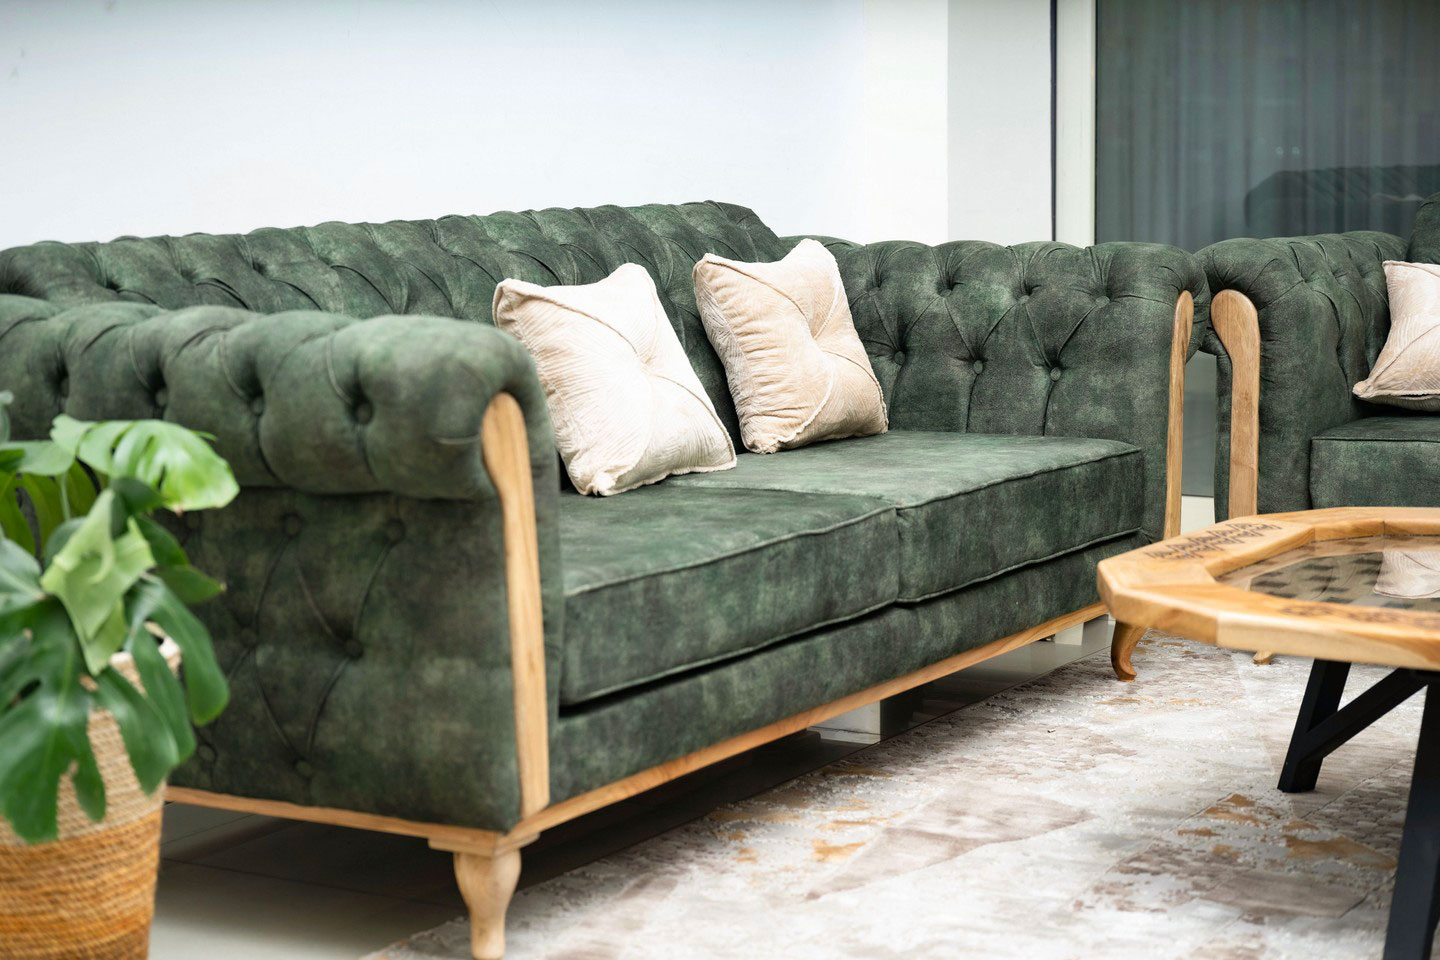 Wood frame sage green two-seater couch